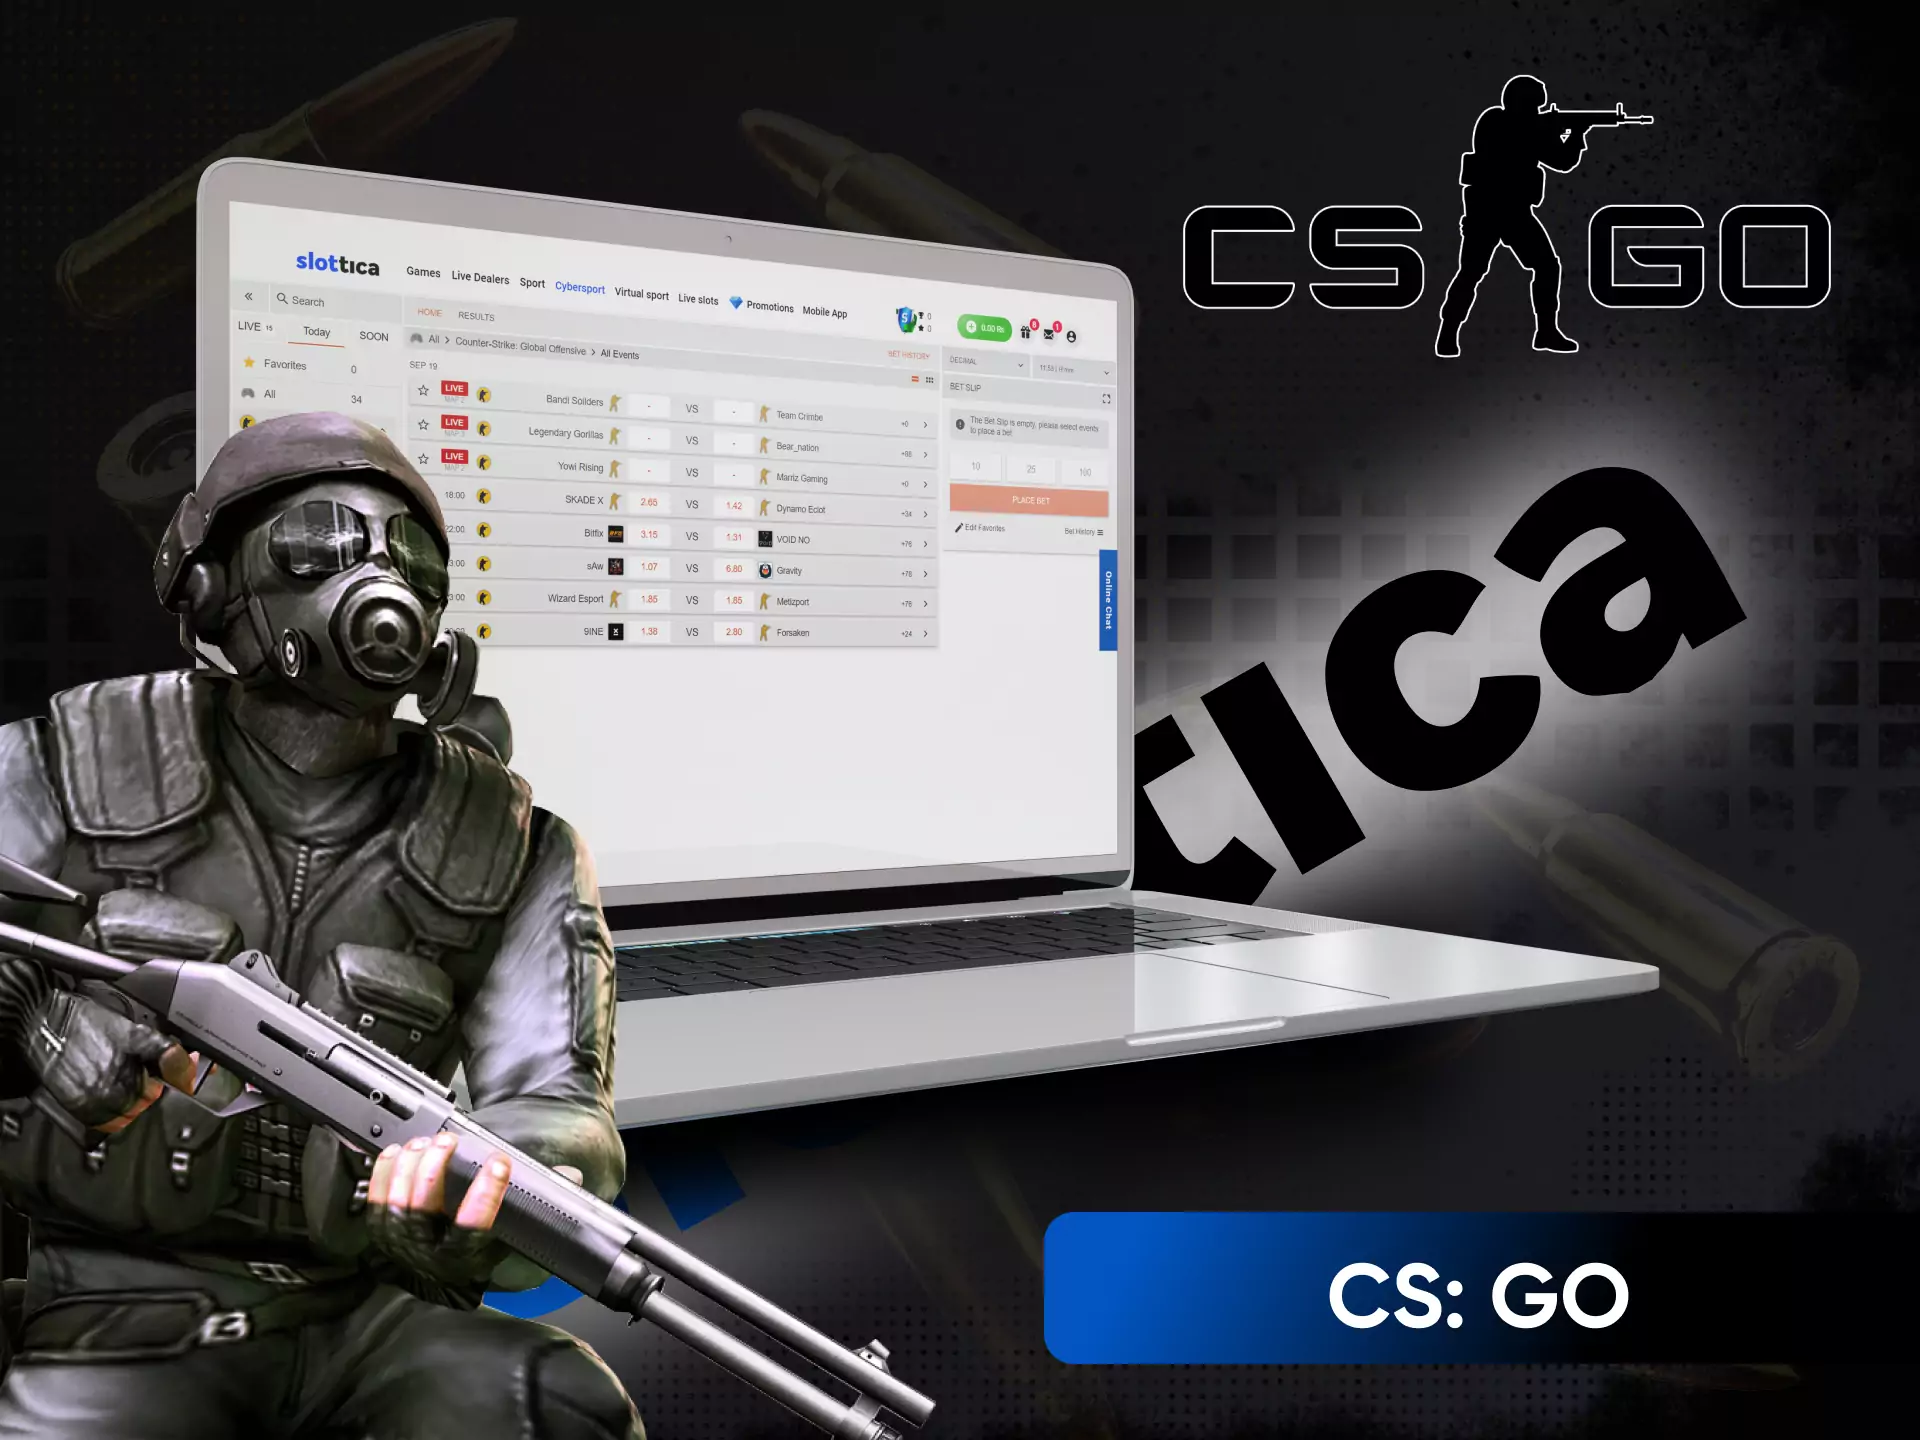 In the Slottica sportsbook, you can place bets on CS:GO events.